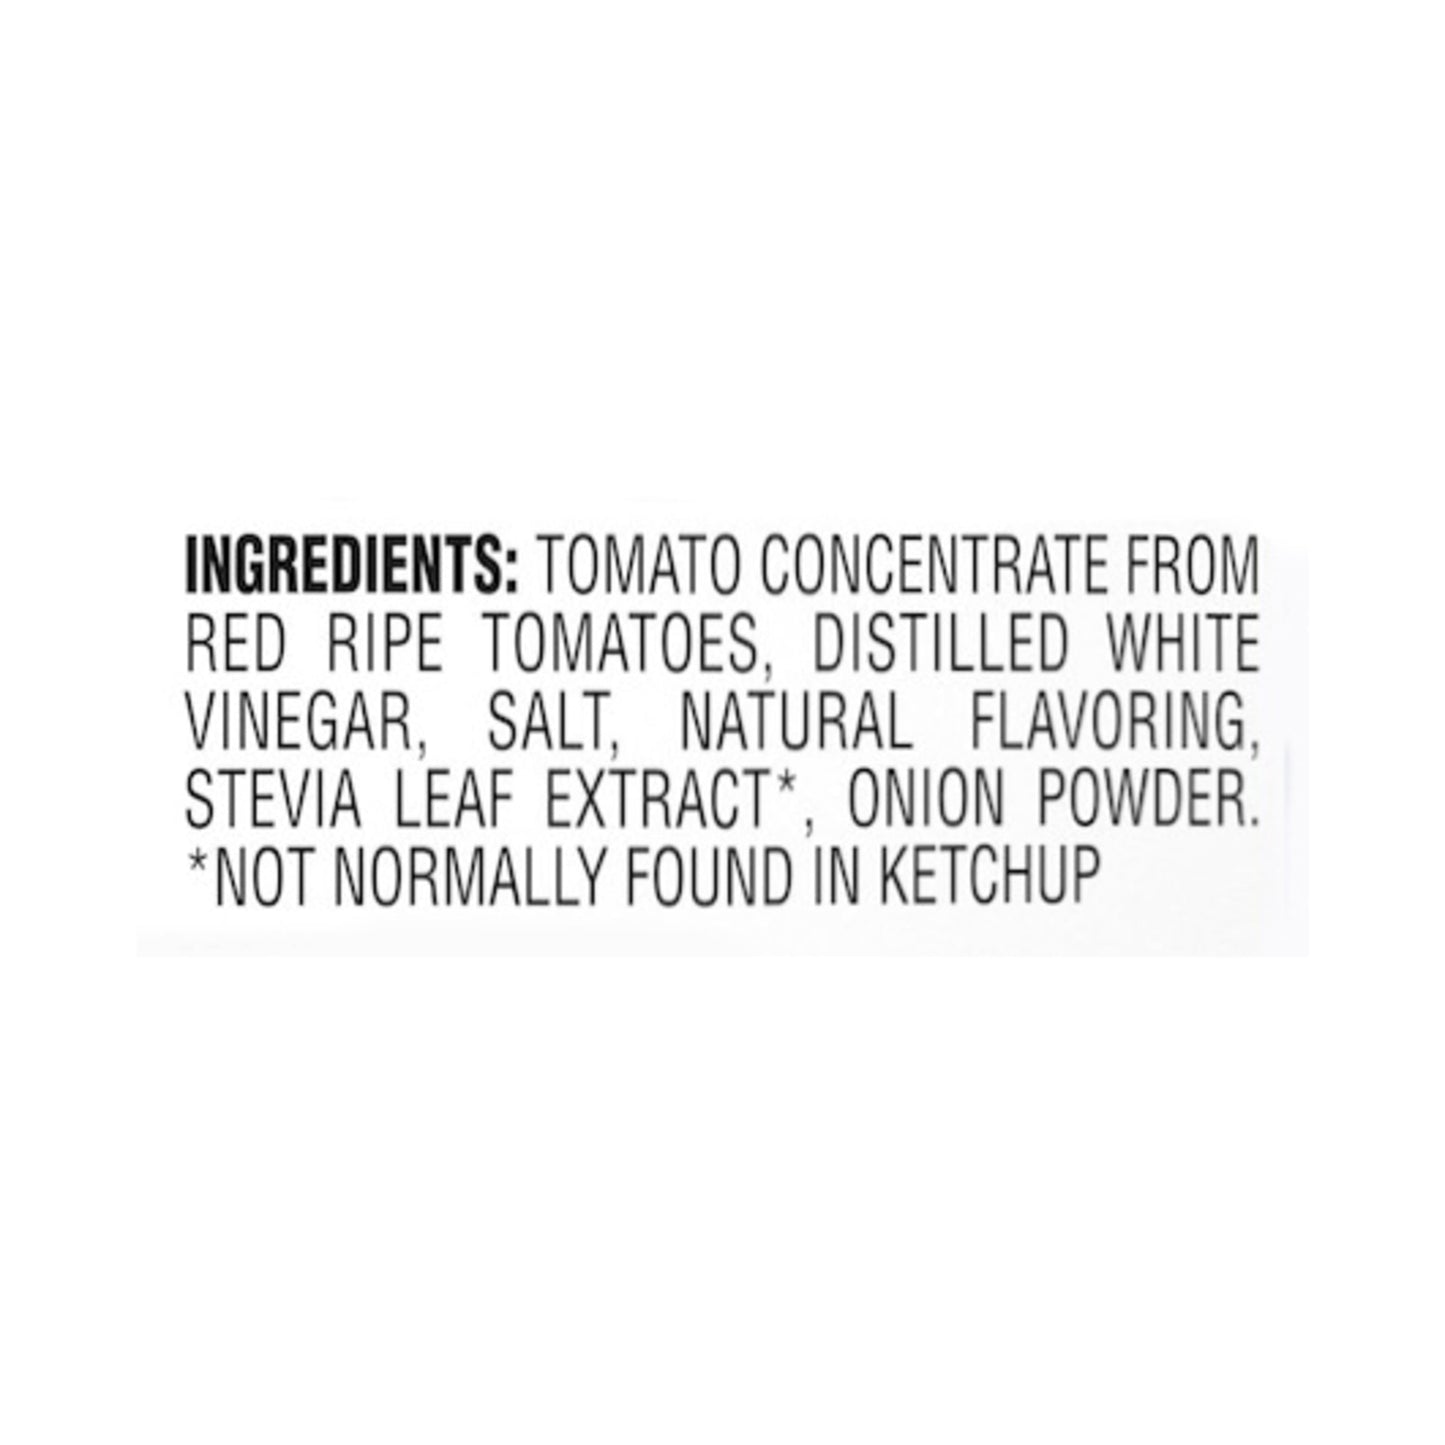 Heinz No Sugar Added Tomato Ketchup 13 oz, Squeeze Bottle